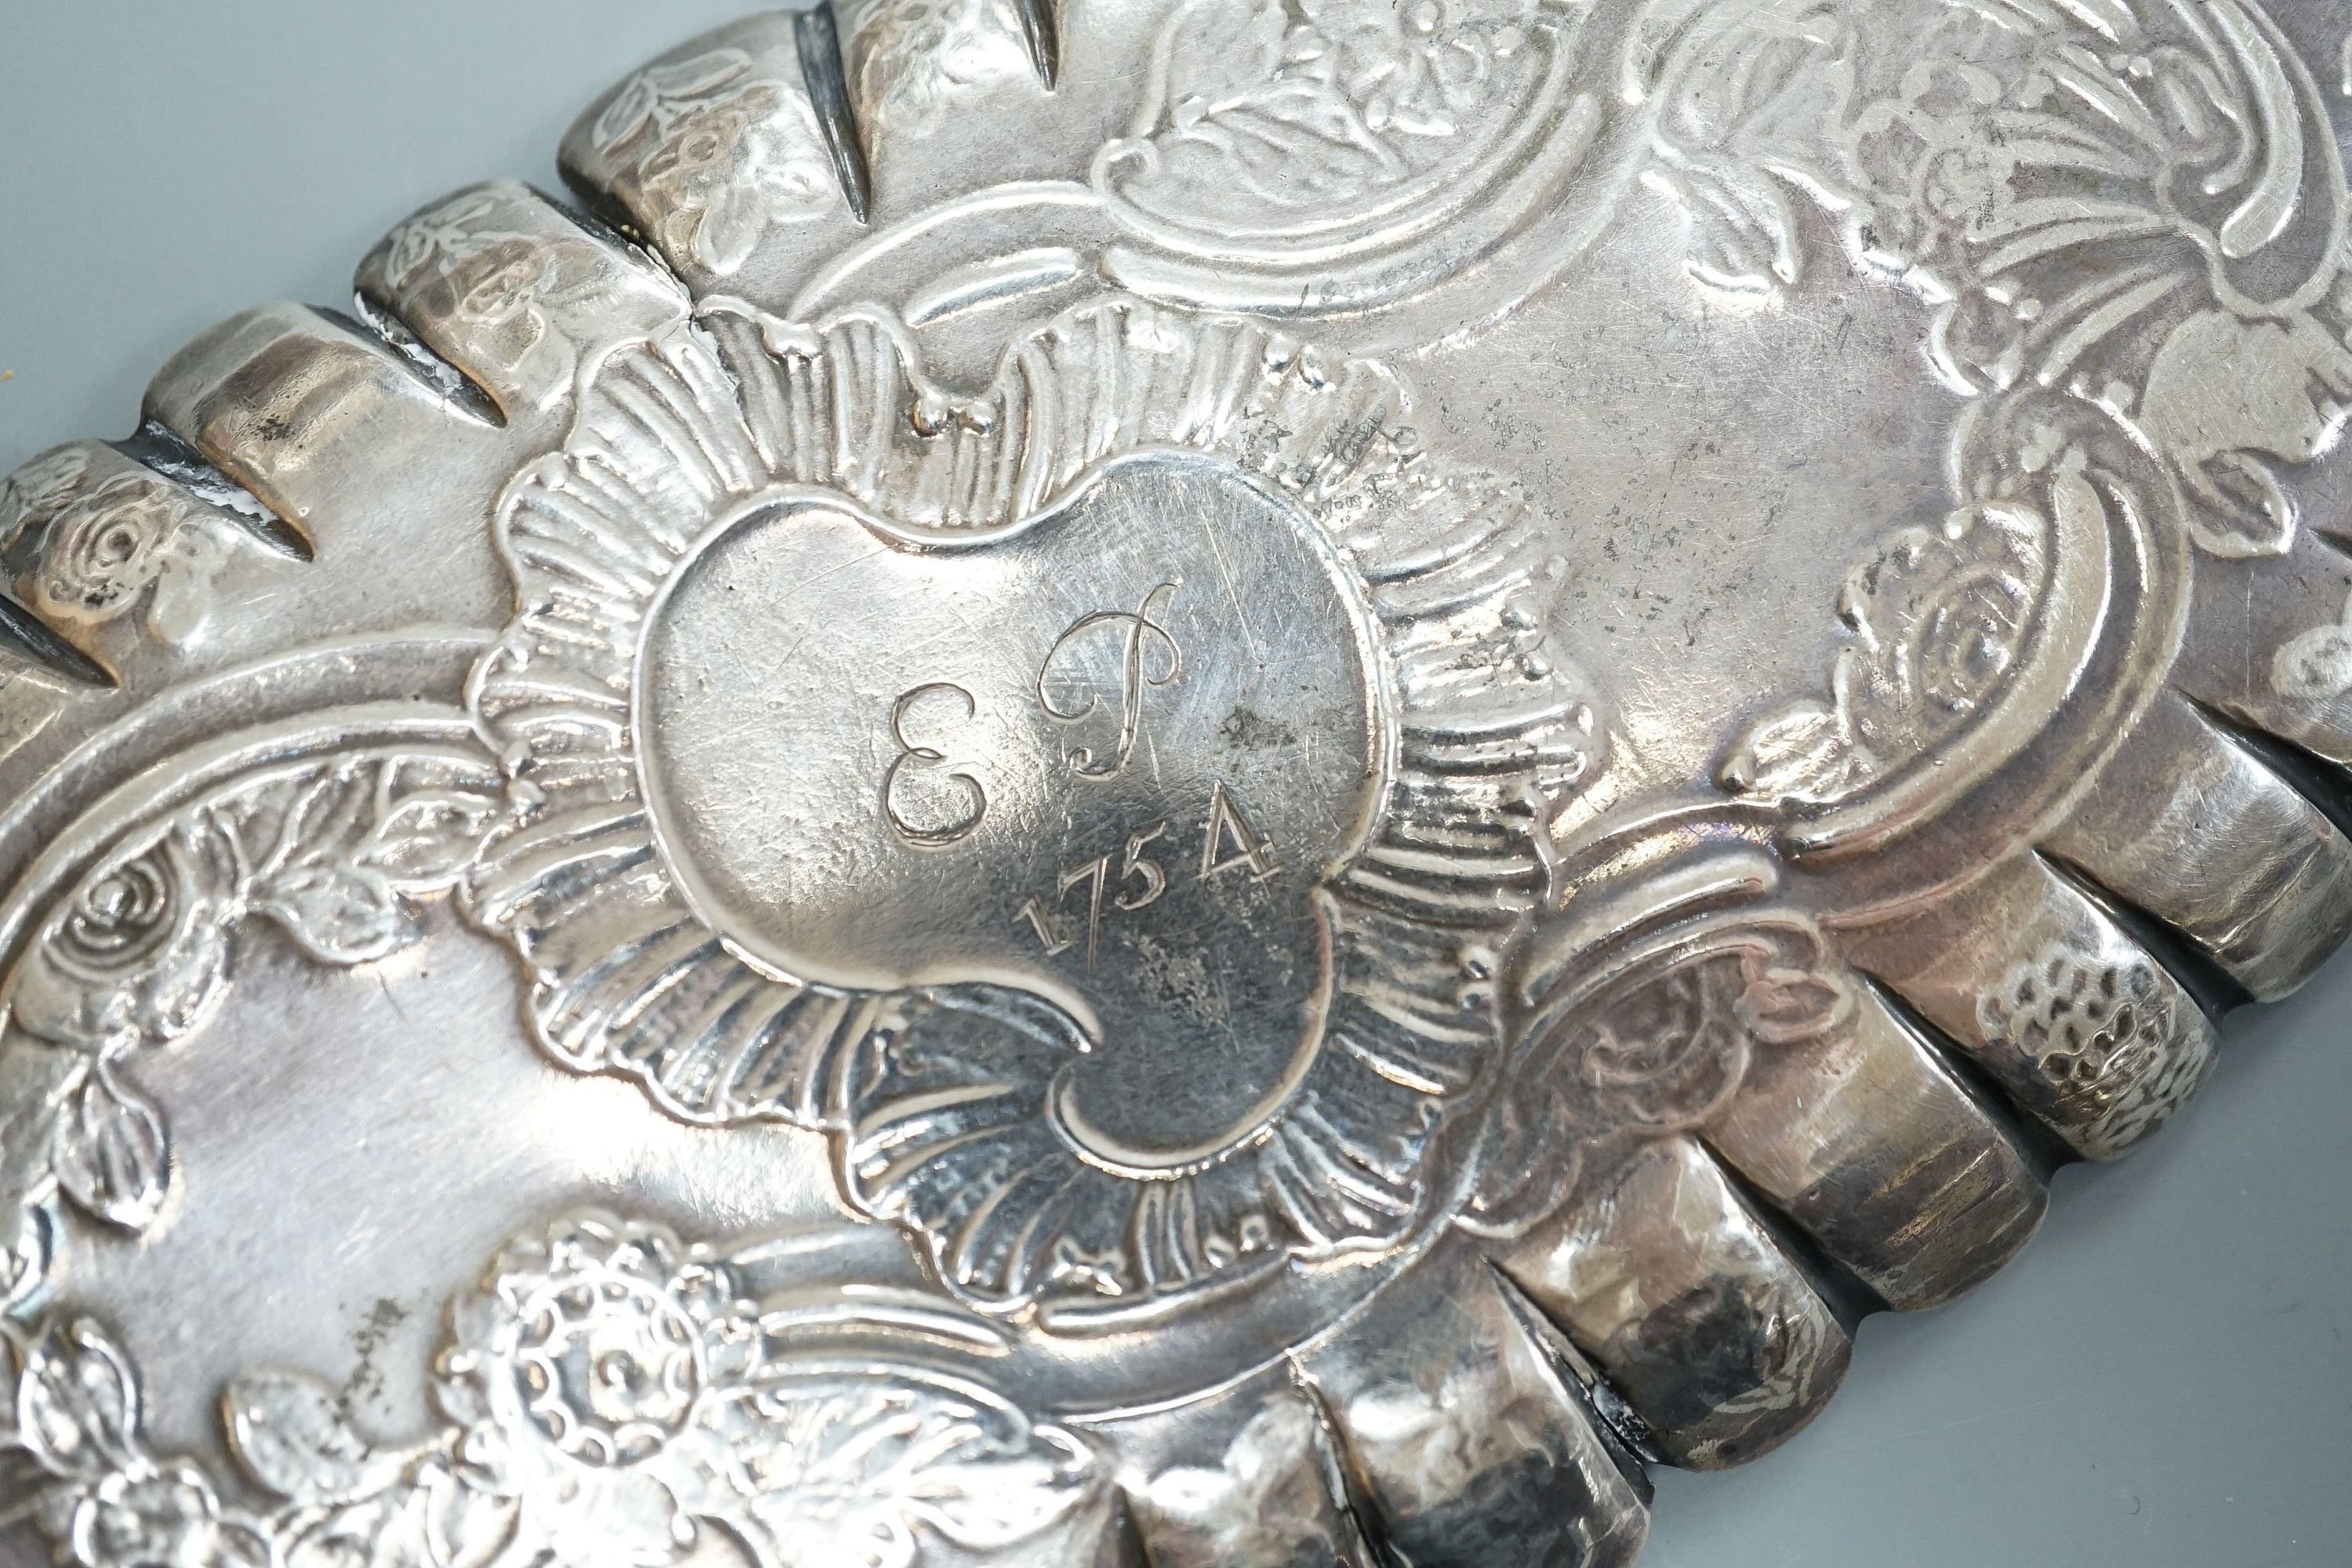 A mid 18th century Irish embossed silver oval pin tray, with engraved date and initials, maker ID?, Dublin, circa 1750, 16.4cm, 74 grams (a.f.)